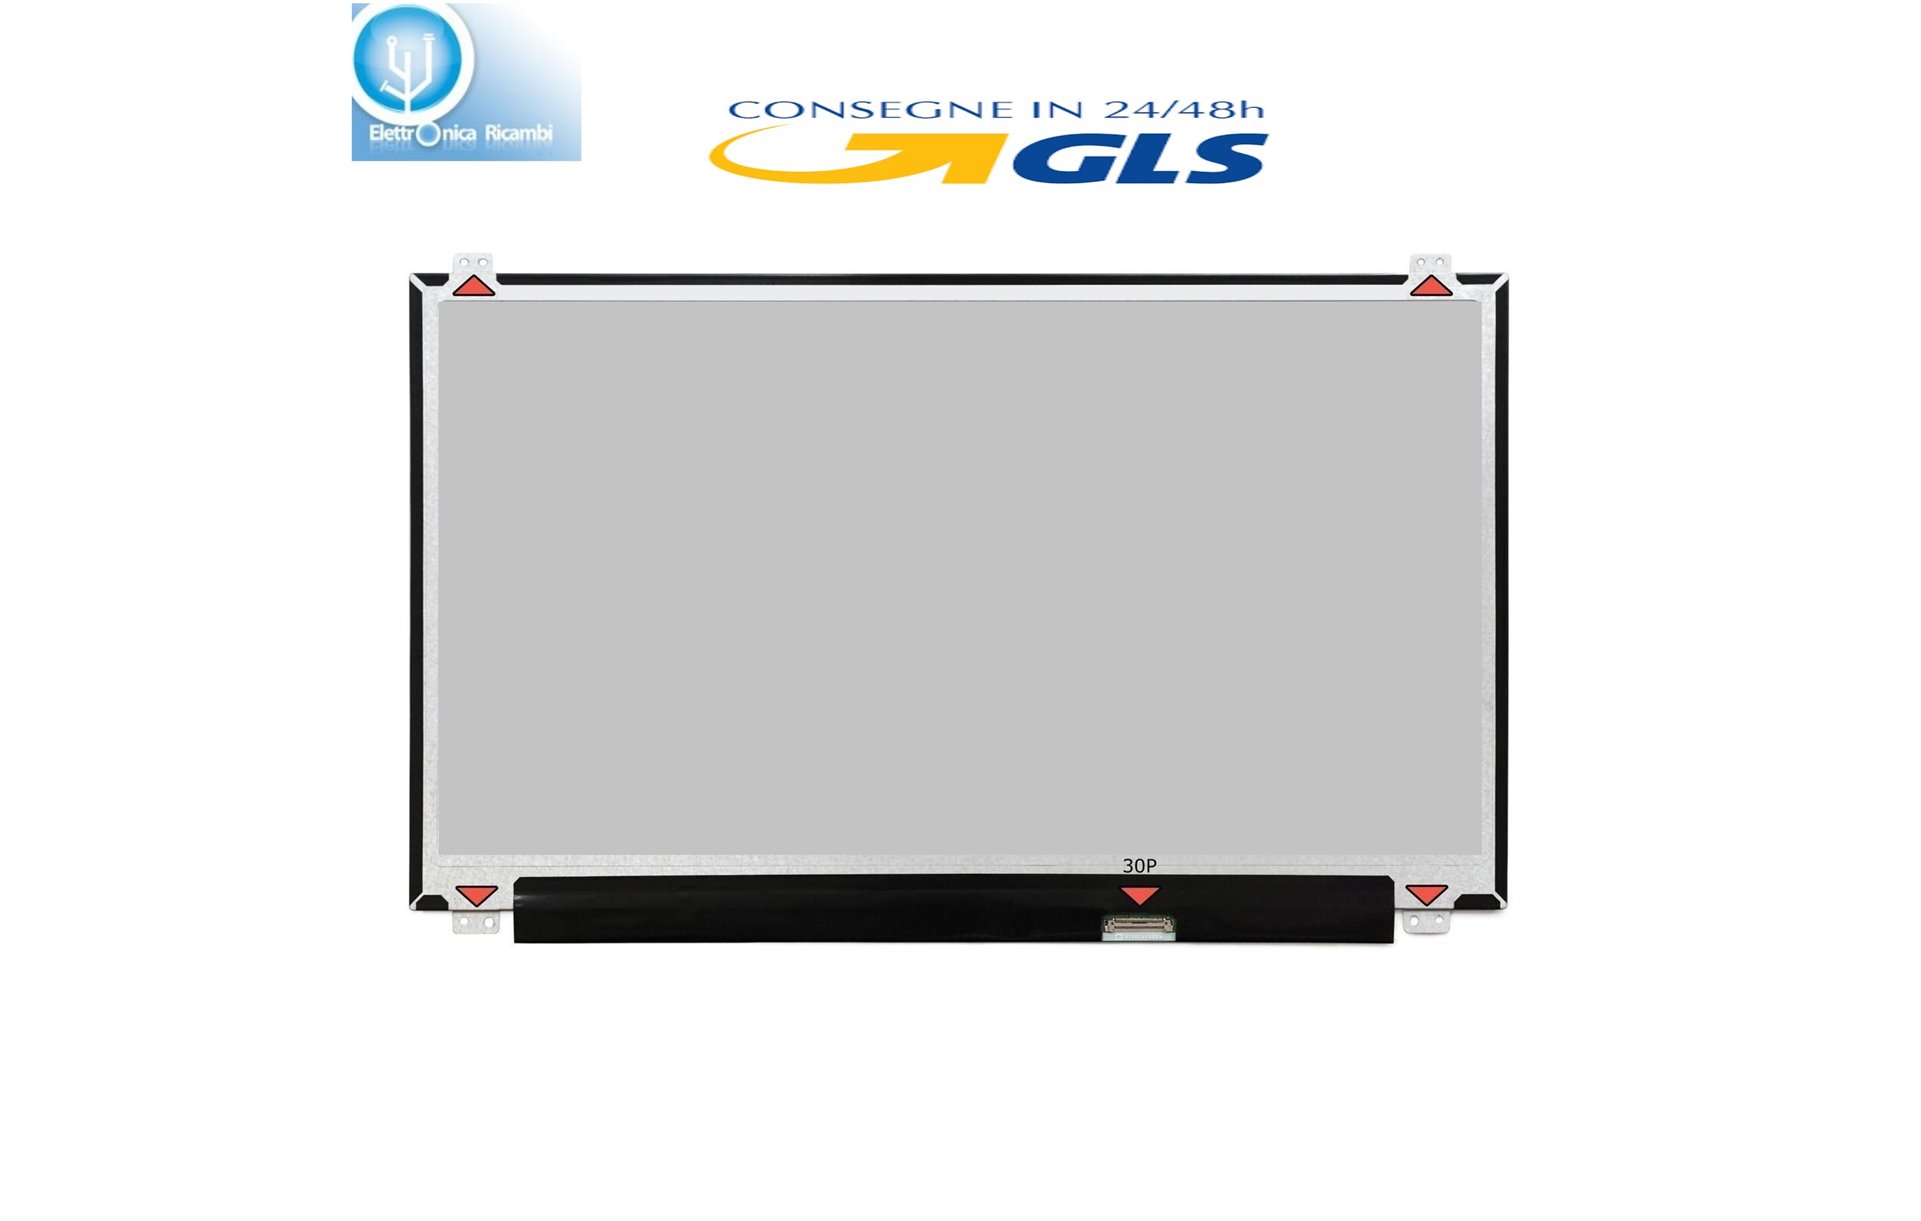 DISPLAY LCD SYSTEM76 SERVAL WS SERW10 SERIES 15.6 1920x1080 LED 30 pin